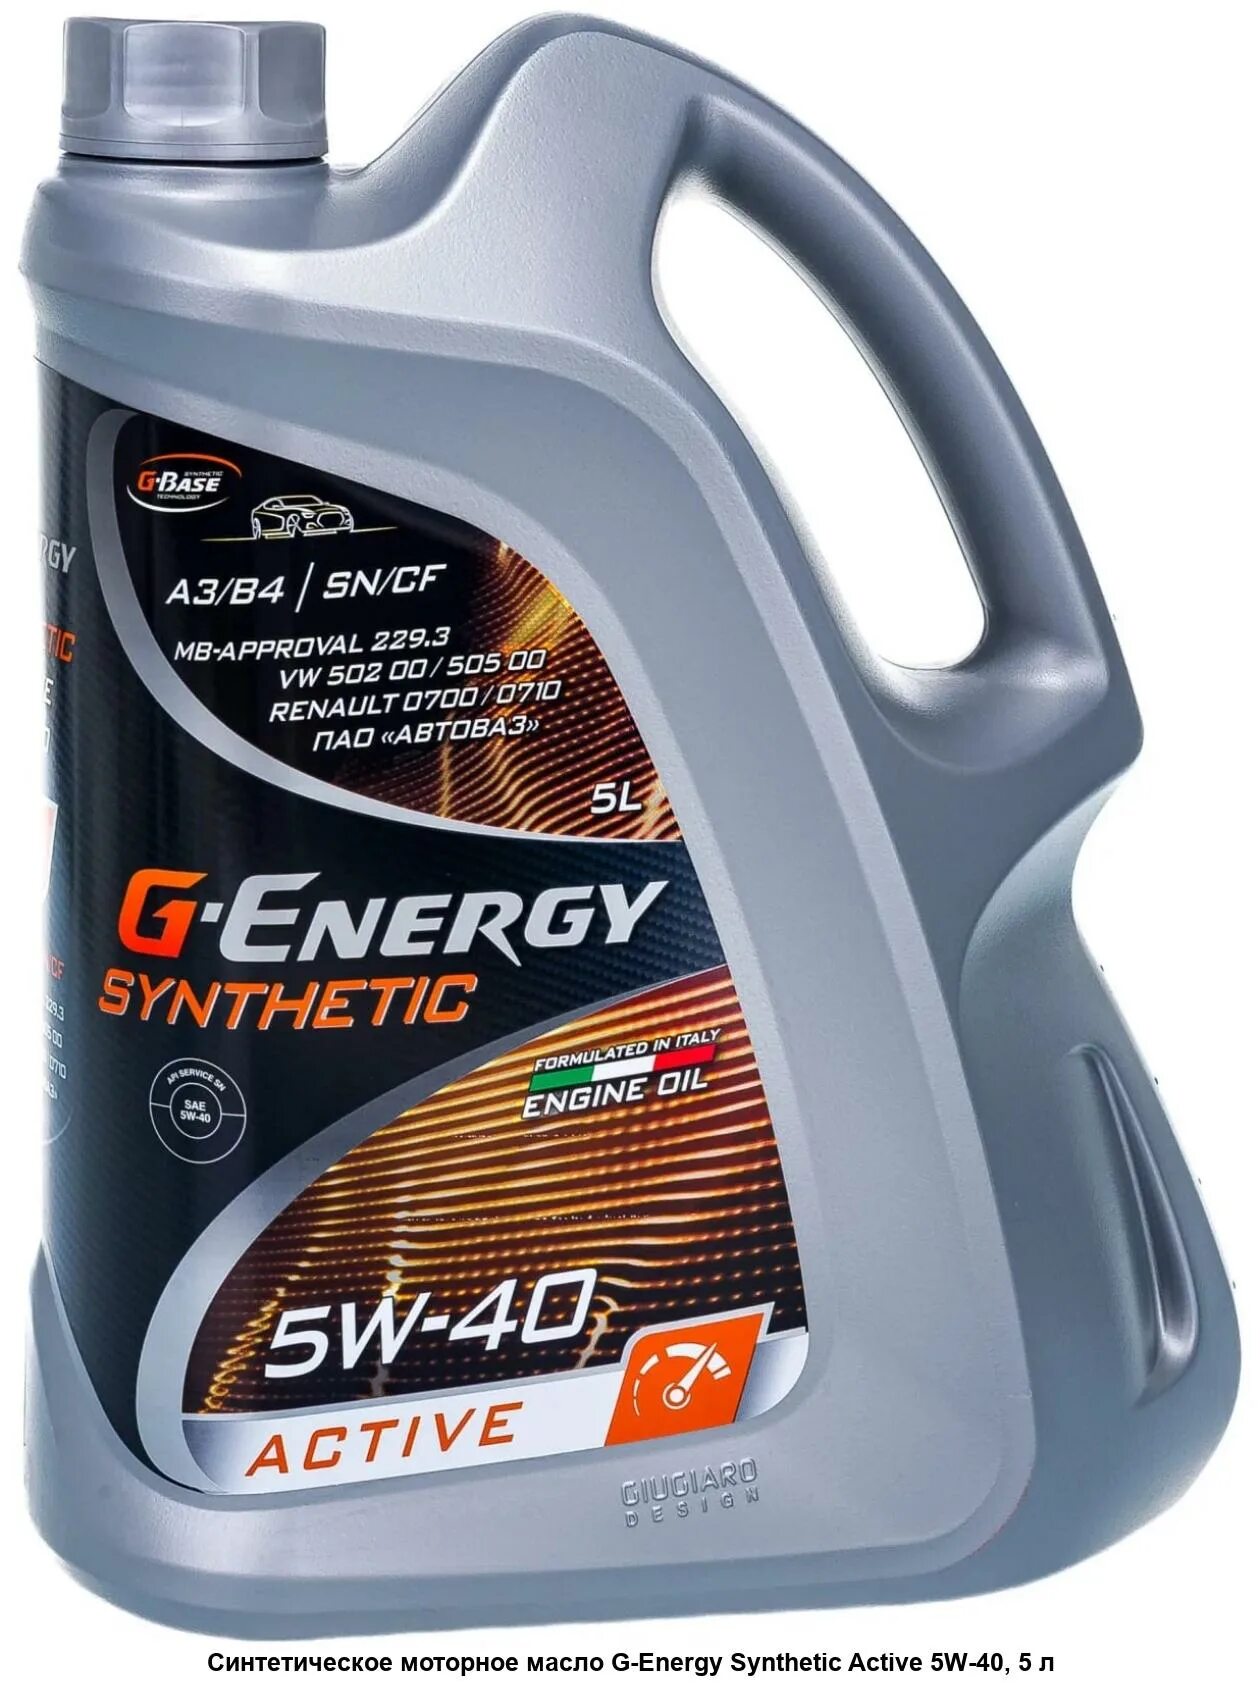 253142411 G-Energy Synthetic Active 5w-40 5l. Масло моторное g-Energy Synthetic Active 5w40. G-Energy Synthetic Active 5w-40. G-Energy Synthetic Active 5w-40 5 л.